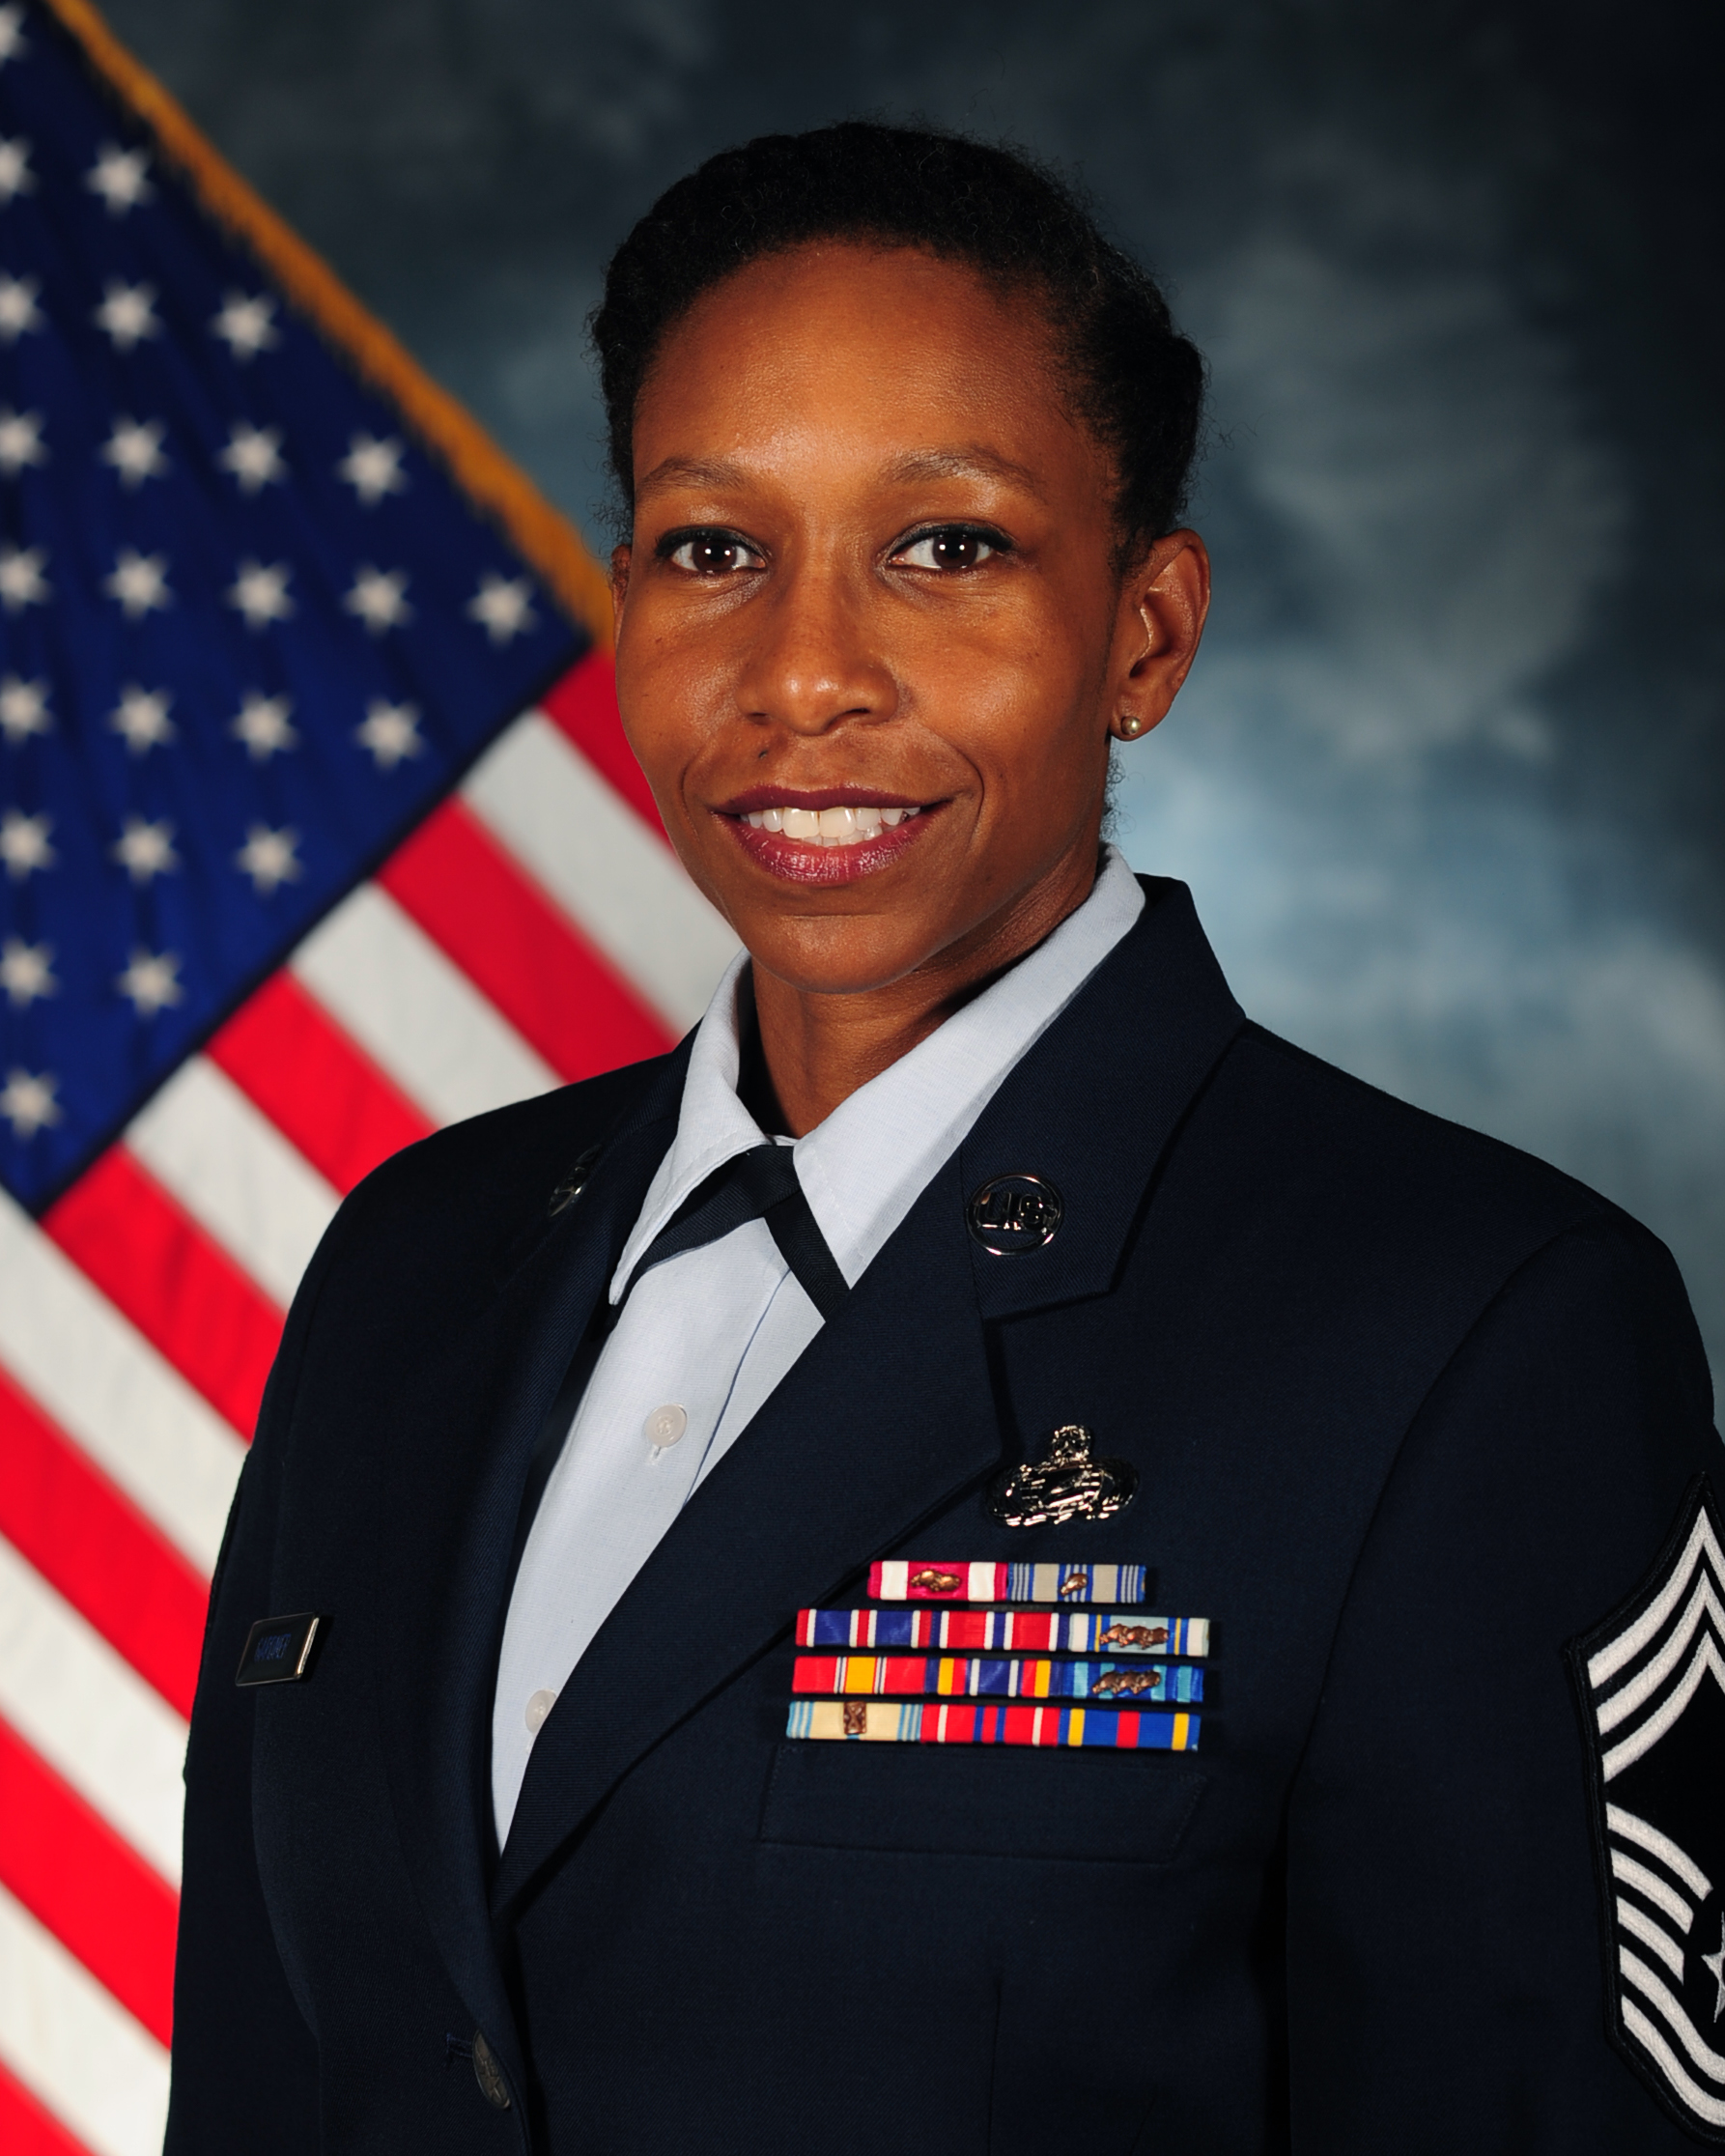 Chief Master Sgt. Edna D. Gardner's official photo